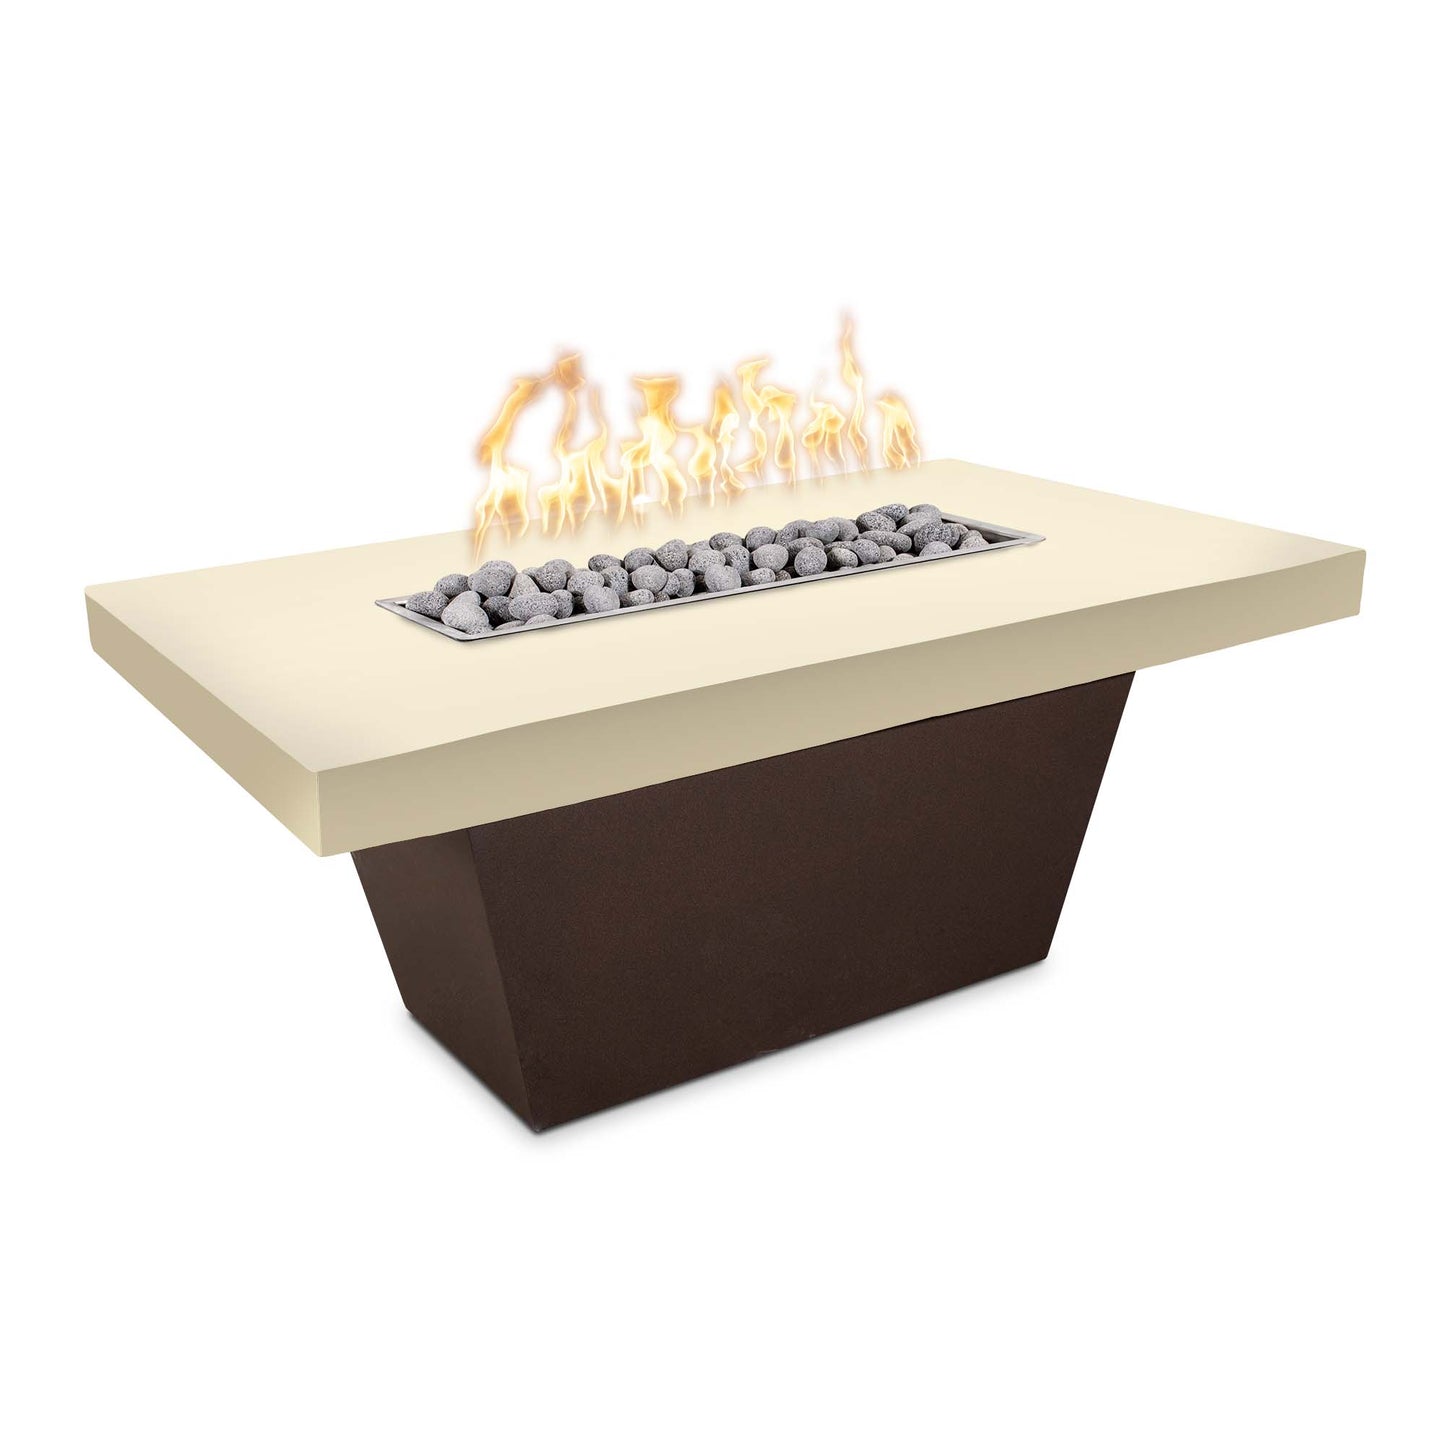 The Outdoor Plus Tacoma 48" Natural Gray Concrete Top & Black Powder Coated Base Natural Gas Fire Table with Flame Sense with Spark Ignition